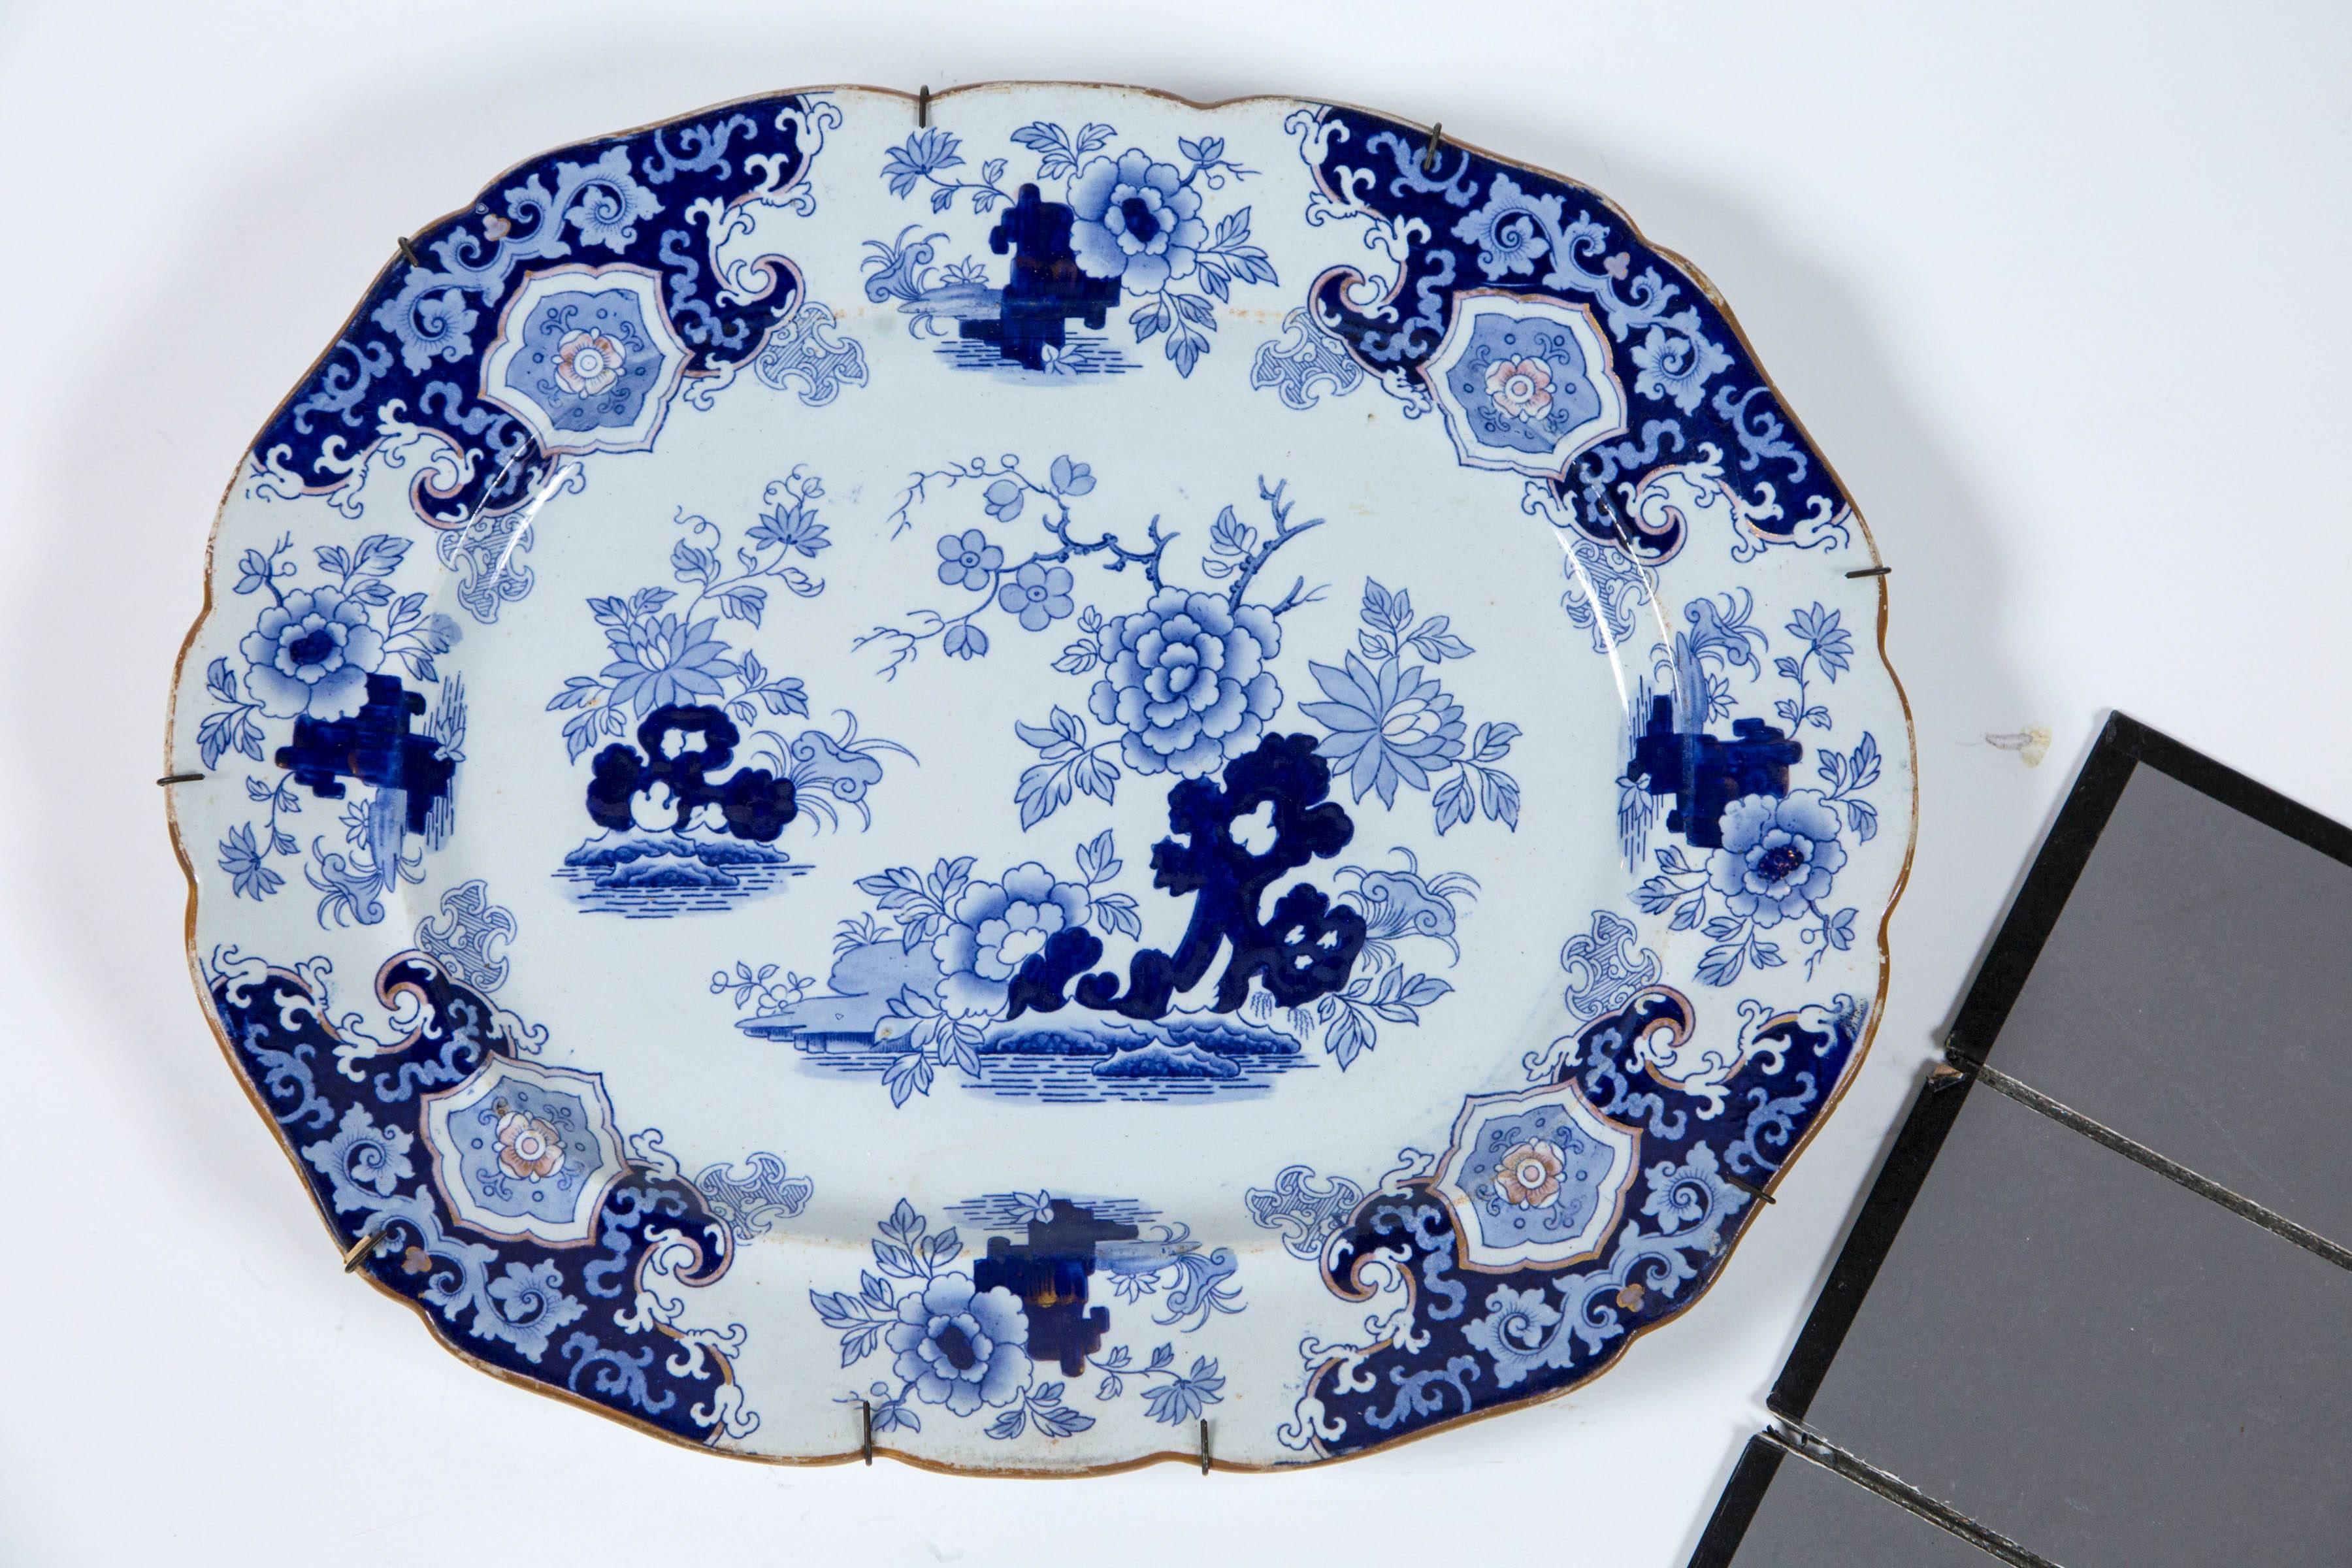 Chinoiserie ironstone platter, Ridgway & Morley, England, circa 1845. A beautifully articulated transferware design with shades of blue, and gold border and accents. Ridgeway & Morley was a major manufacturer in Staffordshire, England. Retains an